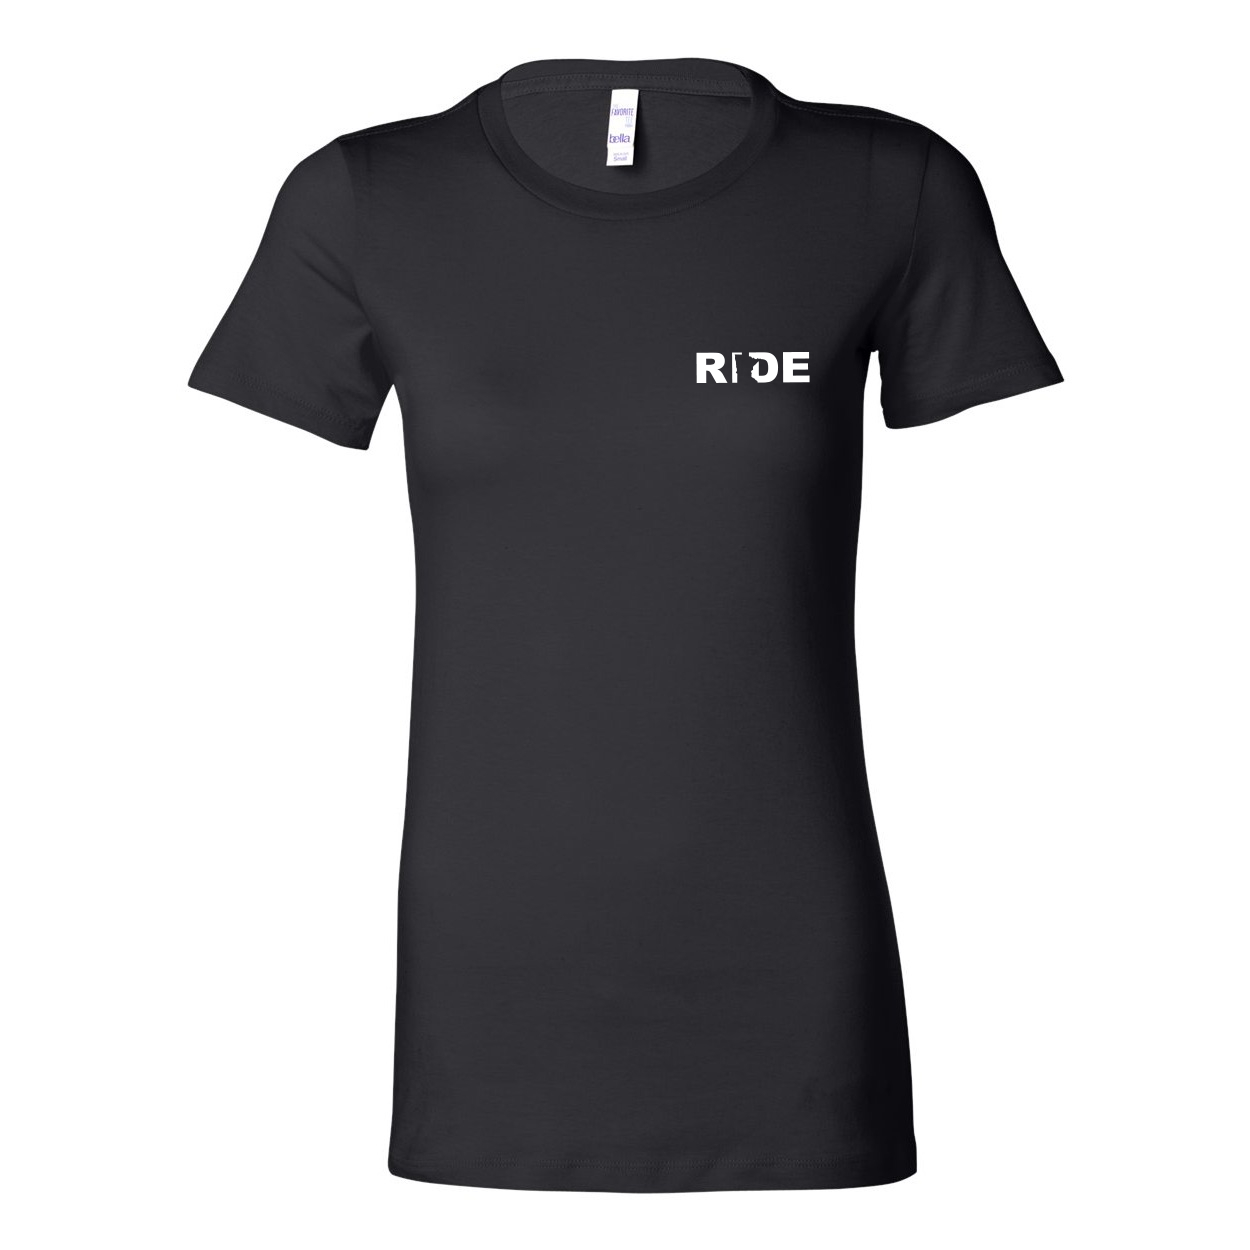 Ride Minnesota Women's Night Out Fitted Tri-Blend T-Shirt Black